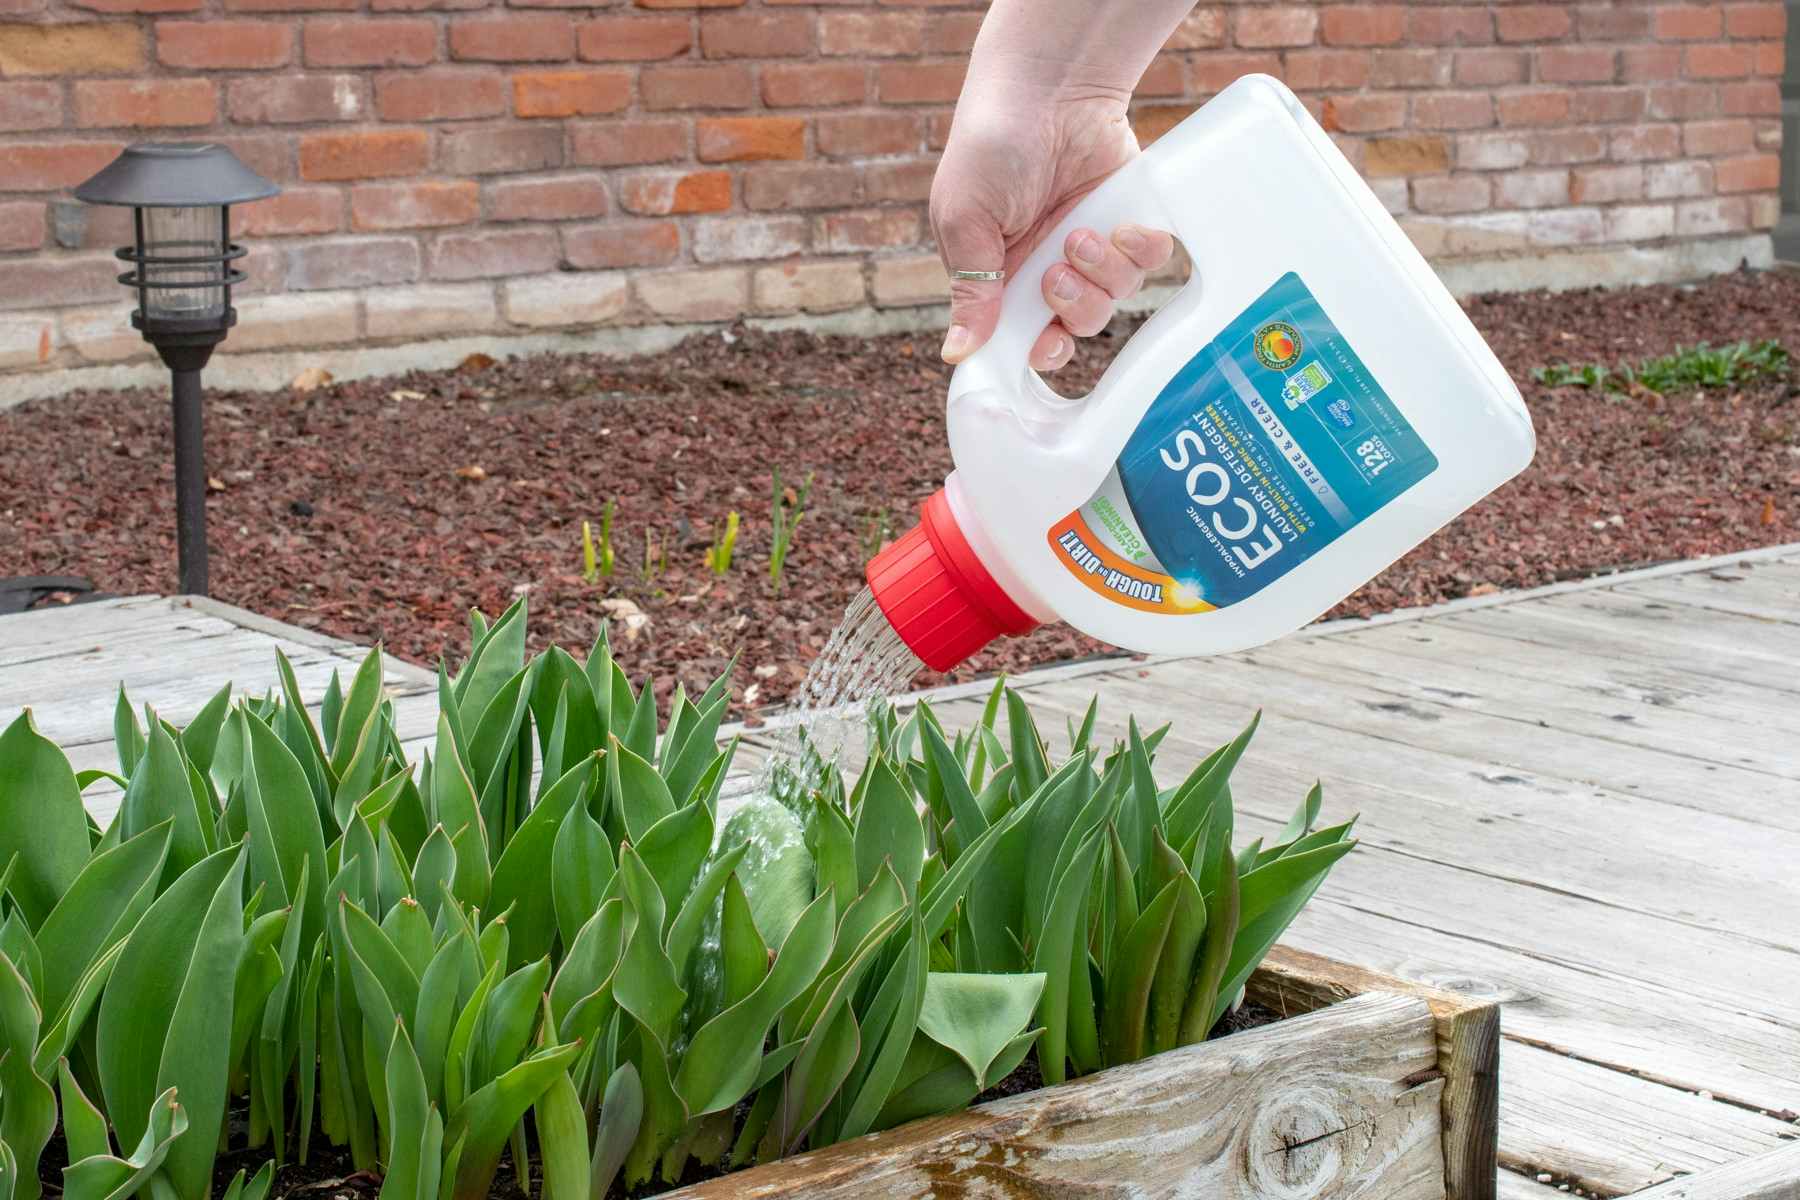 someone using a laundry detergent bottle for a garden watering can